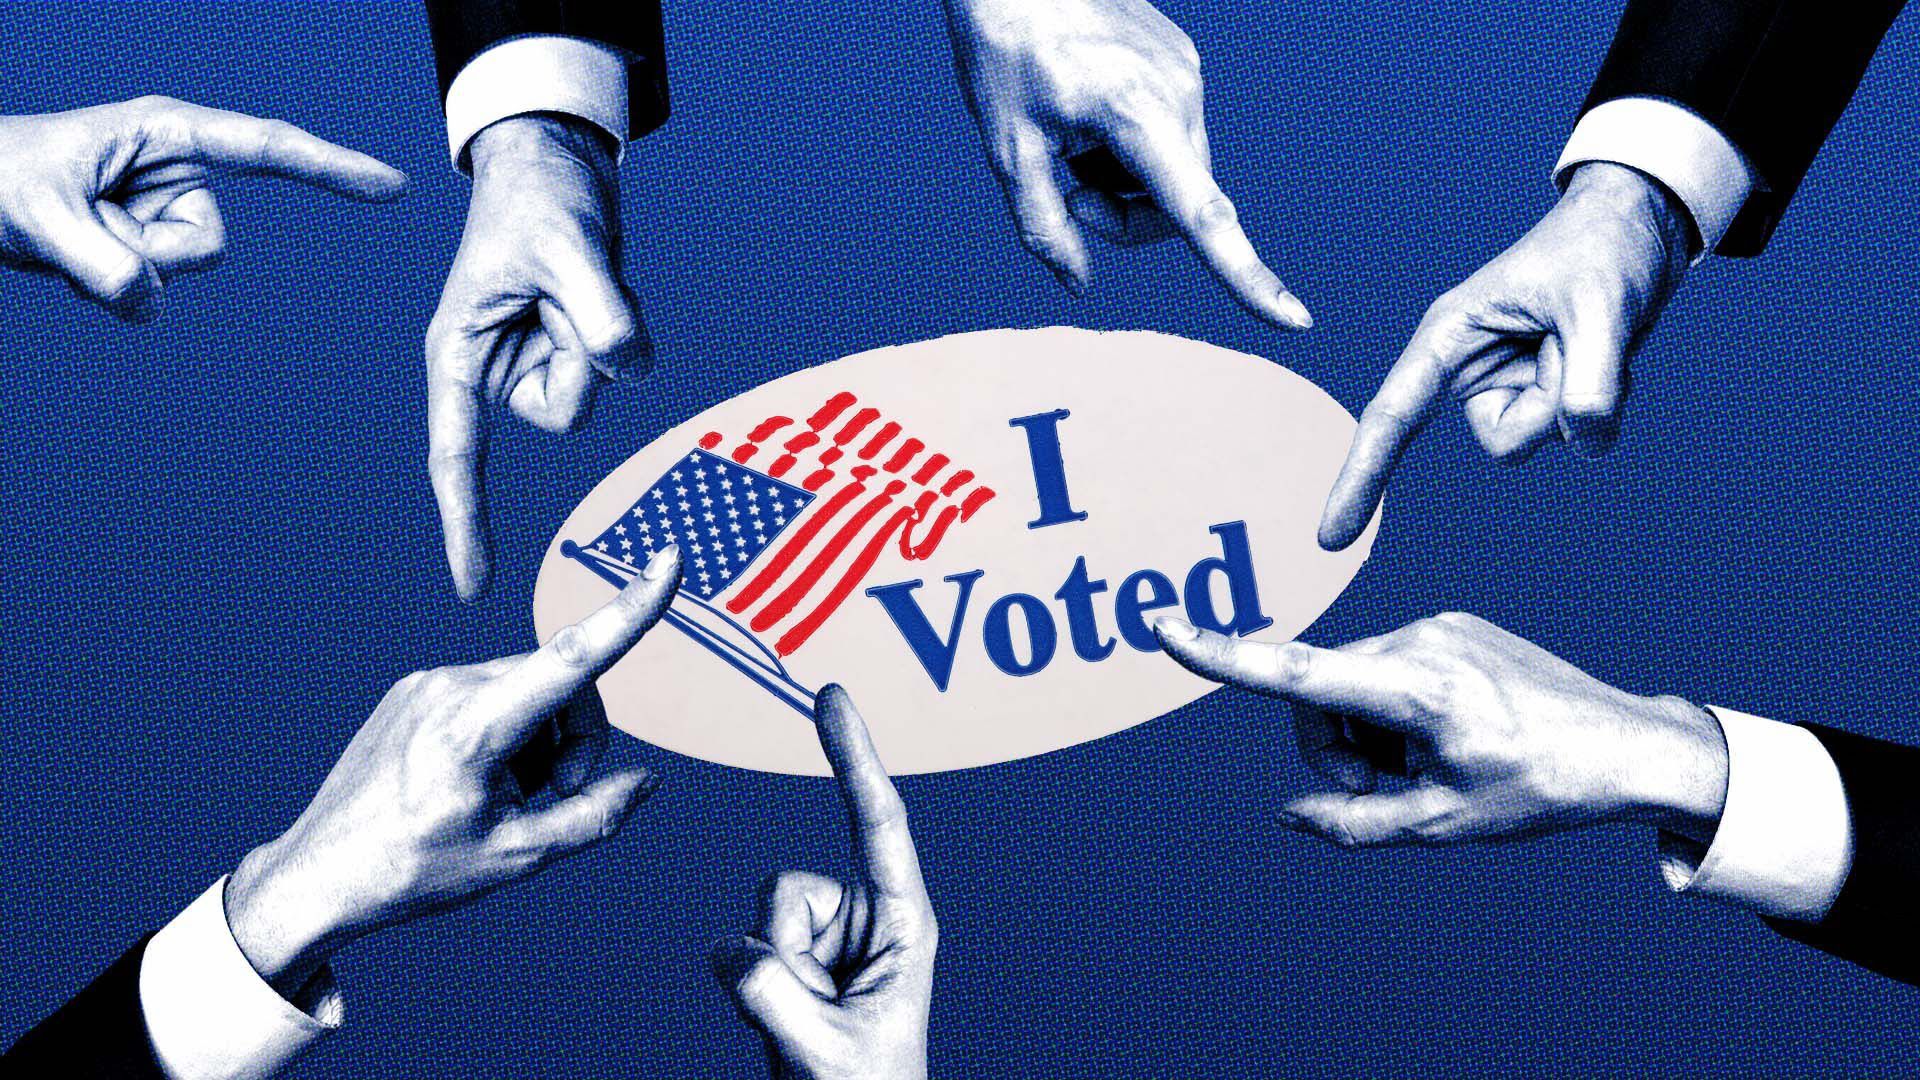 In this image, a group of hands point at an "I Voted" sticker